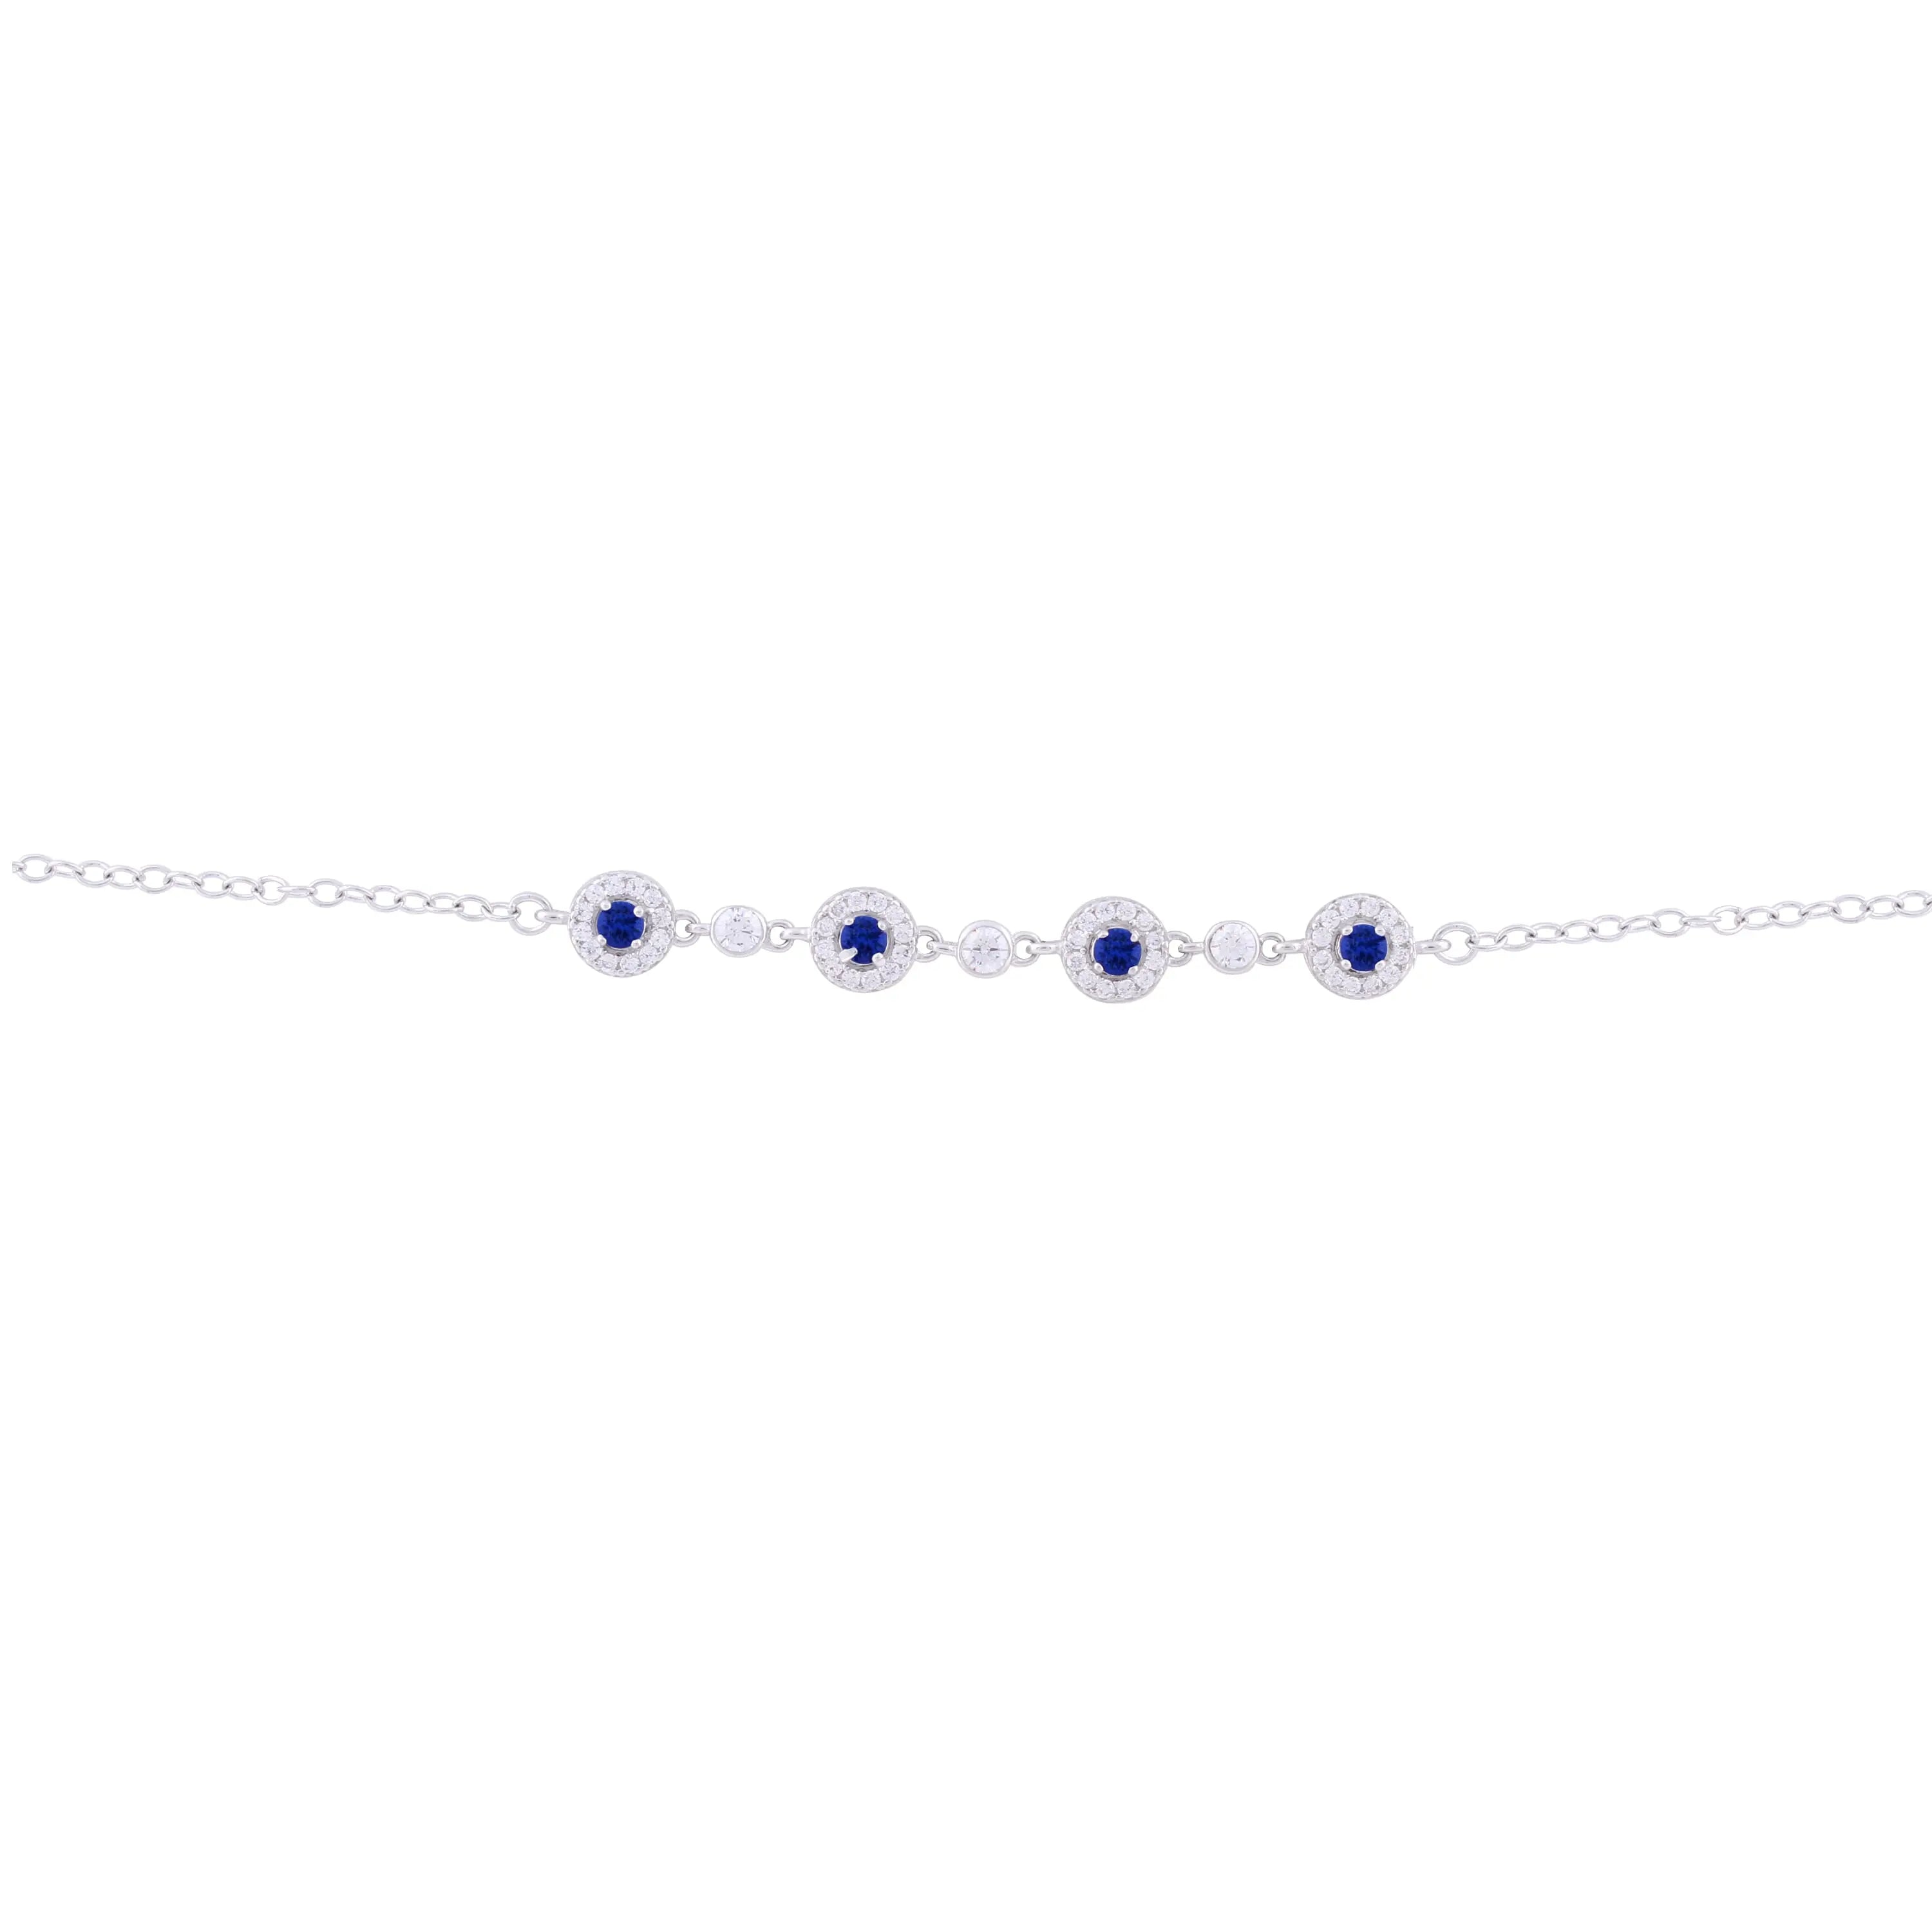 Asfour Chain Bracelet Made Of 925 Sterling Silver In The Shape Of Four Circles, In The Middle Of Each Circle Is A Blue Stone And Its Frame Is Studded With Transparent Zircon Stones